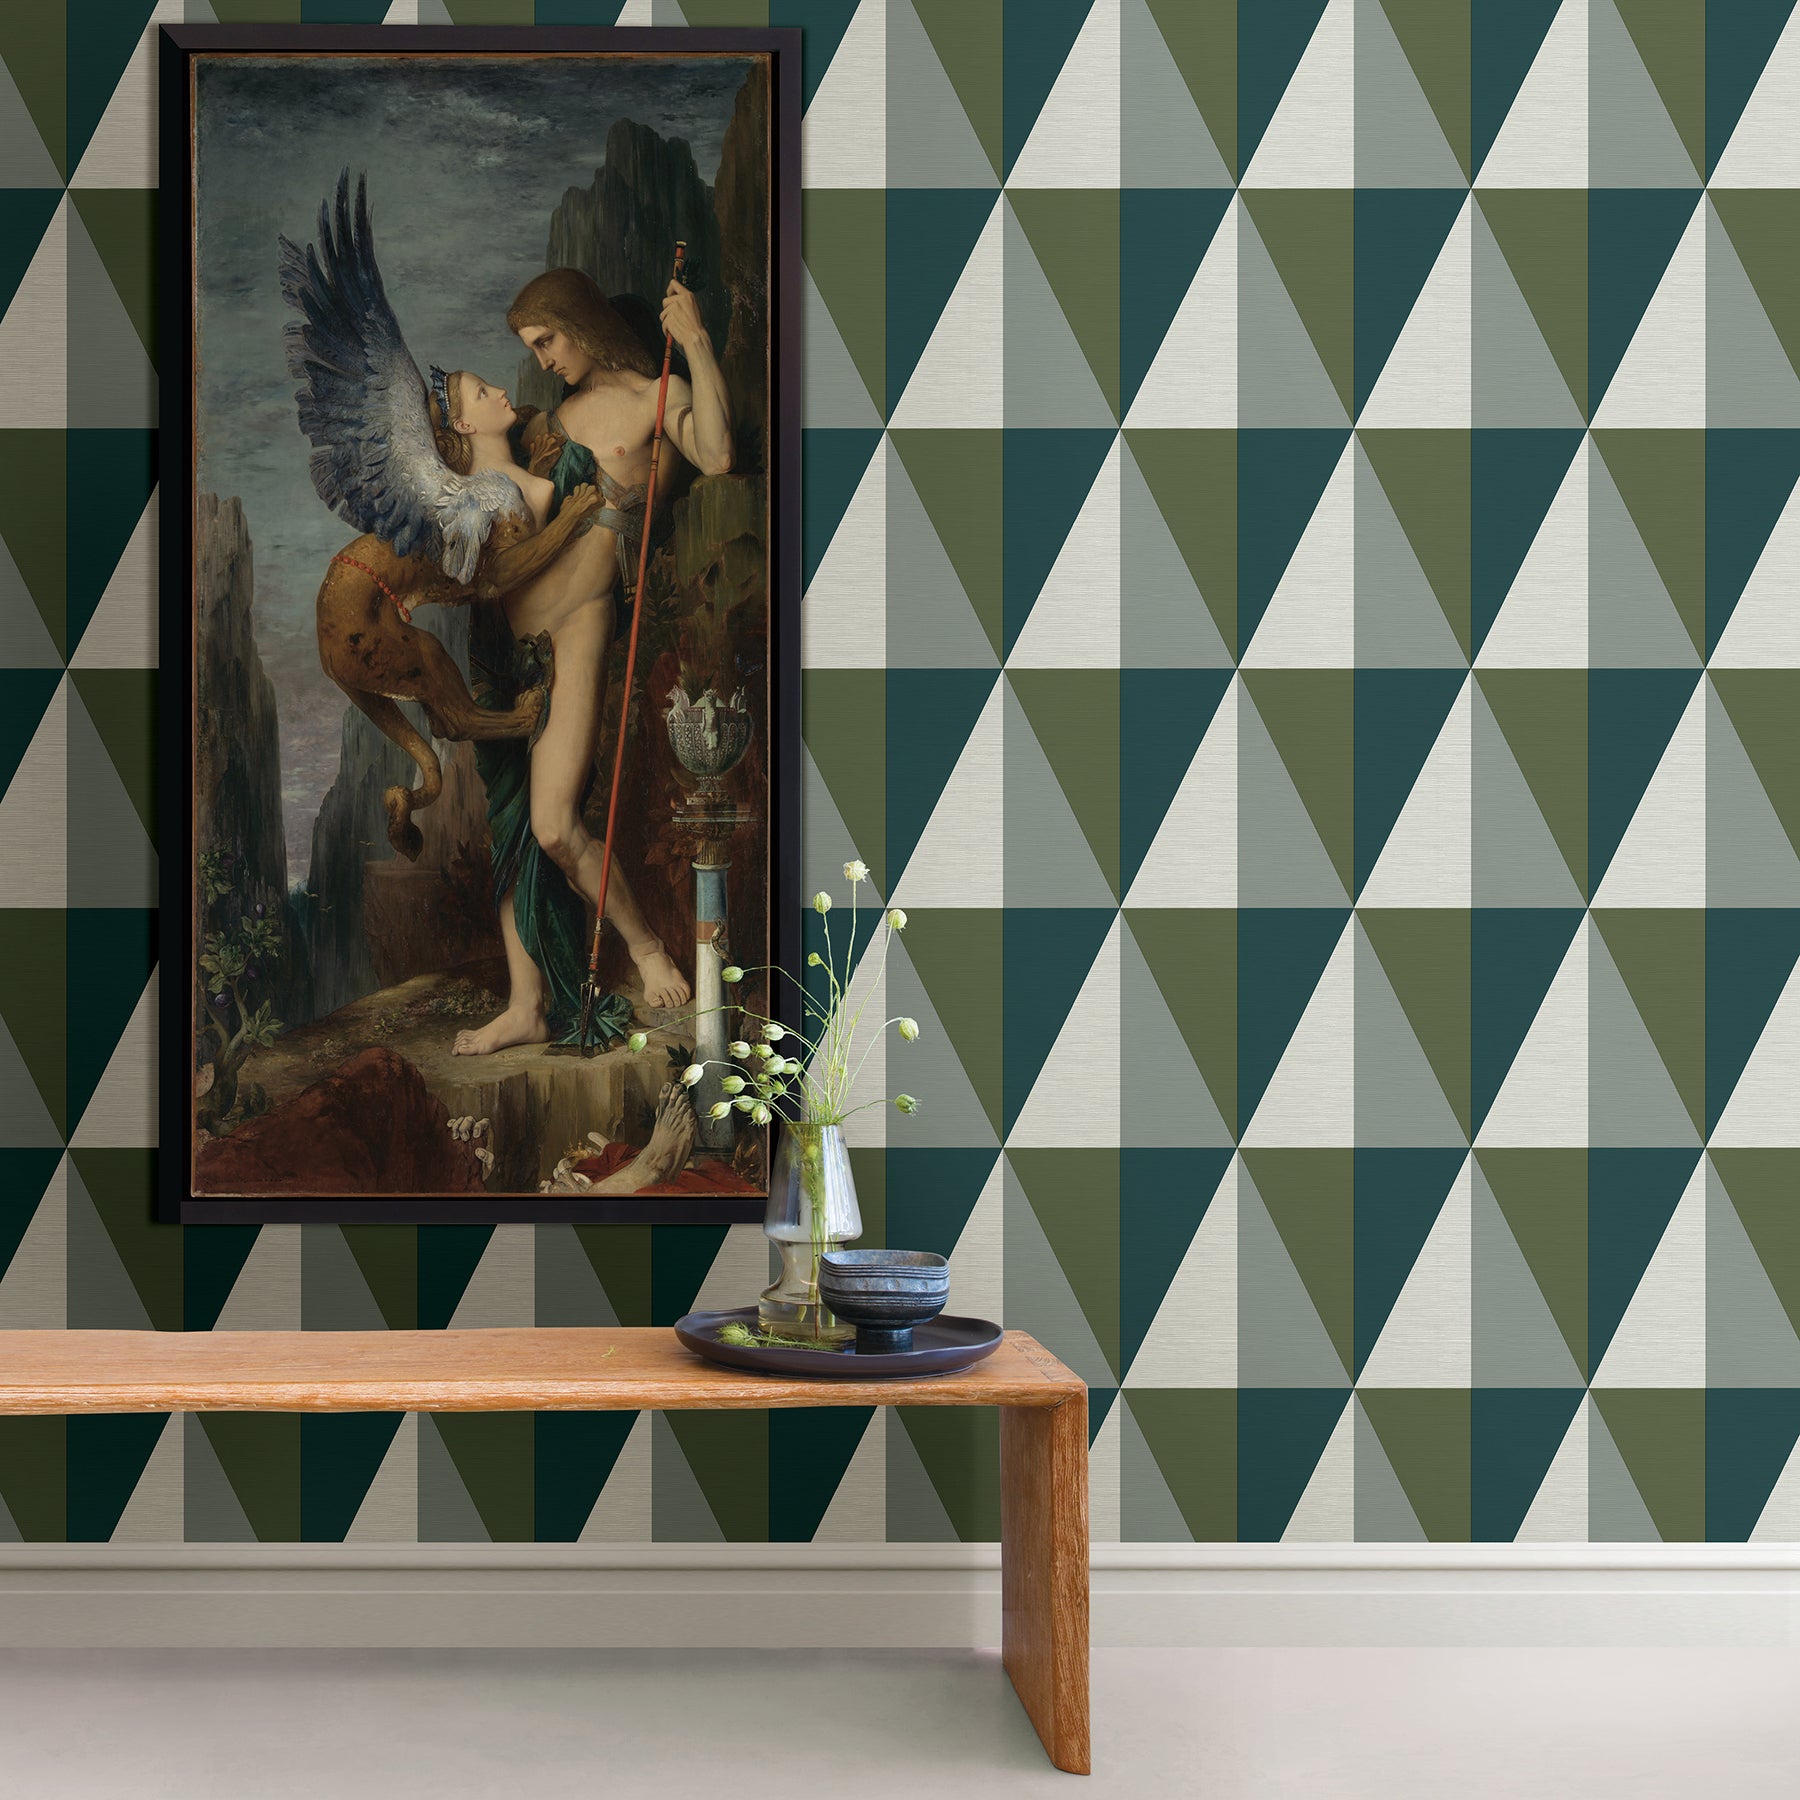 Acquire 2902-25537 Theory Aspect Green Geometric Faux Grasscloth A Street Prints Wallpaper